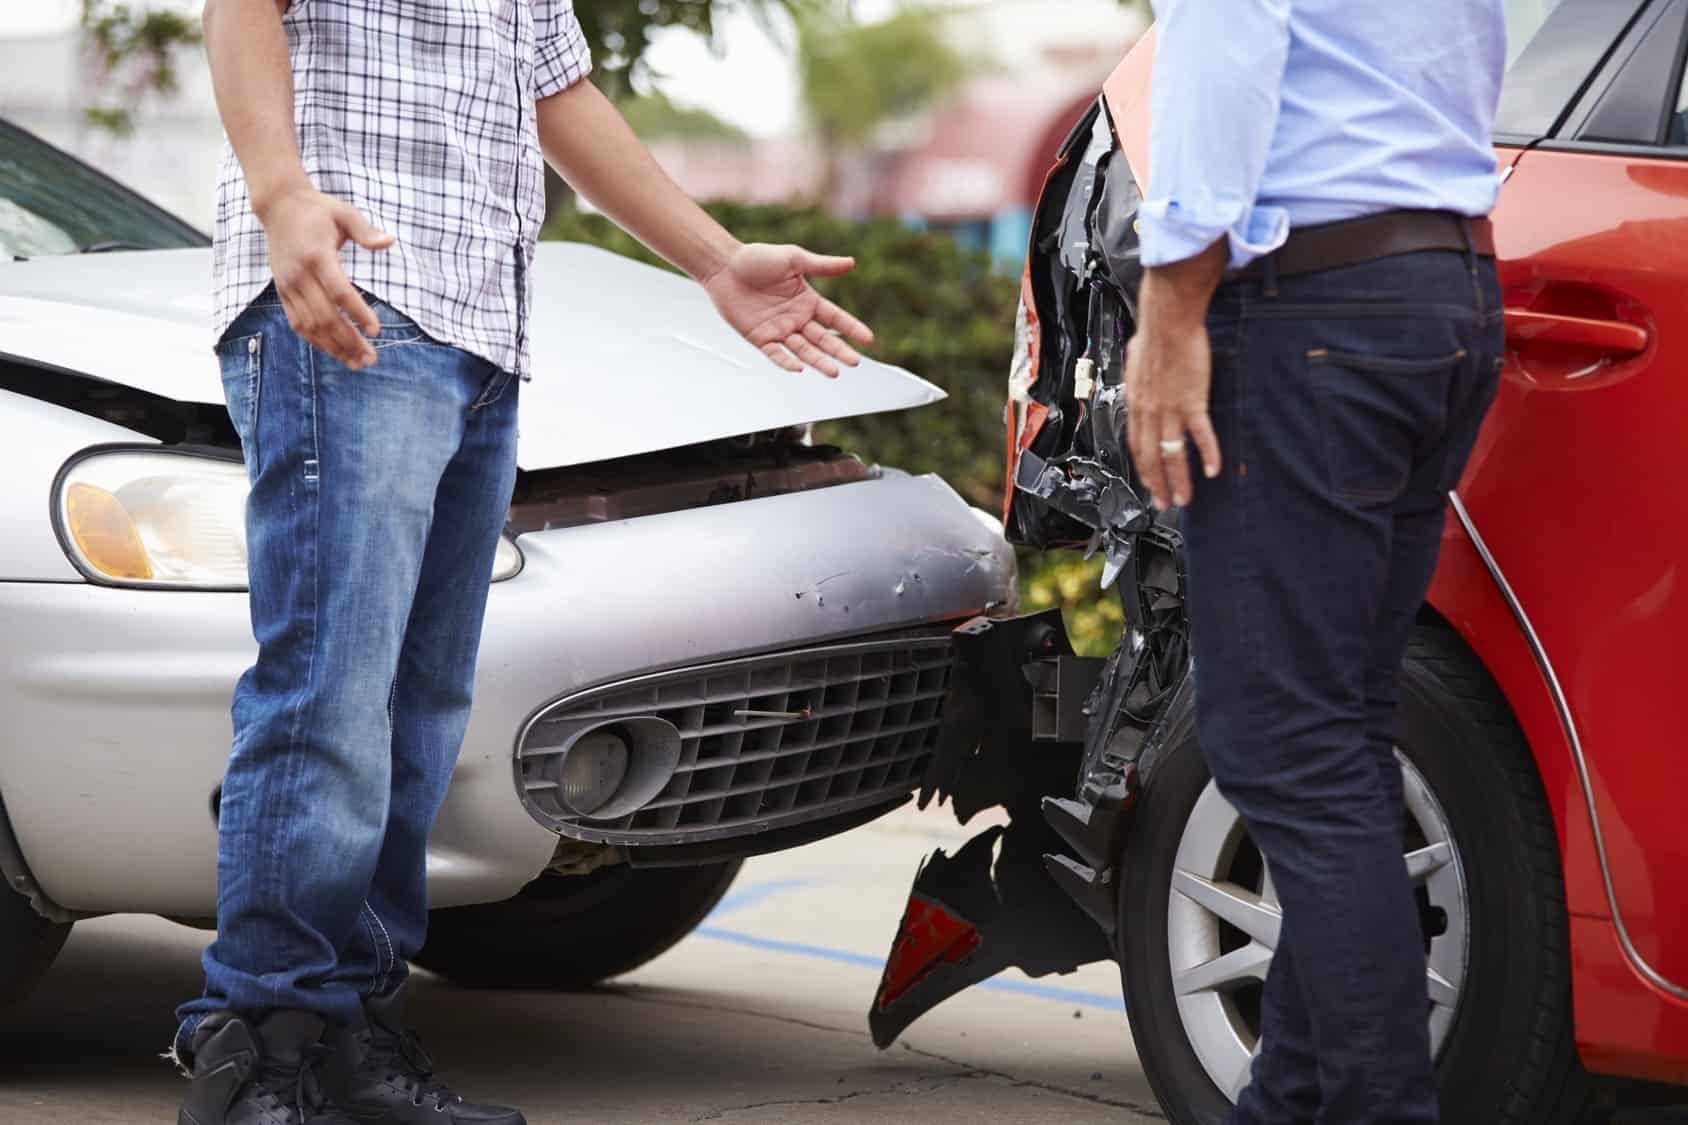 Rental Car Accidents and Contacting a Lawyer